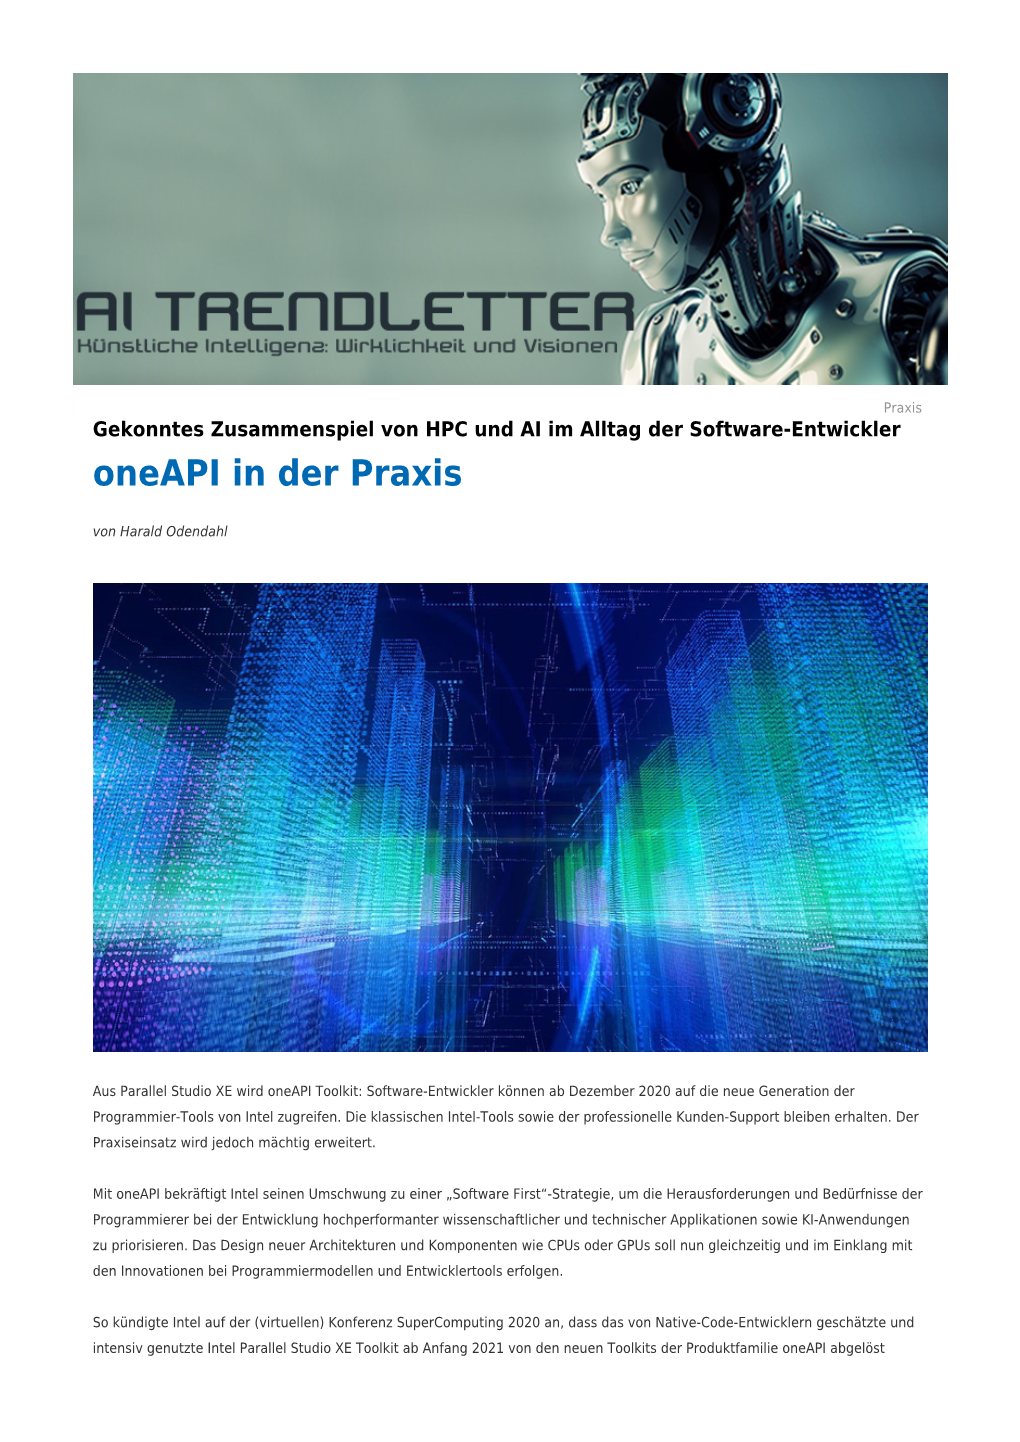 5. Oneapi in Der Praxis